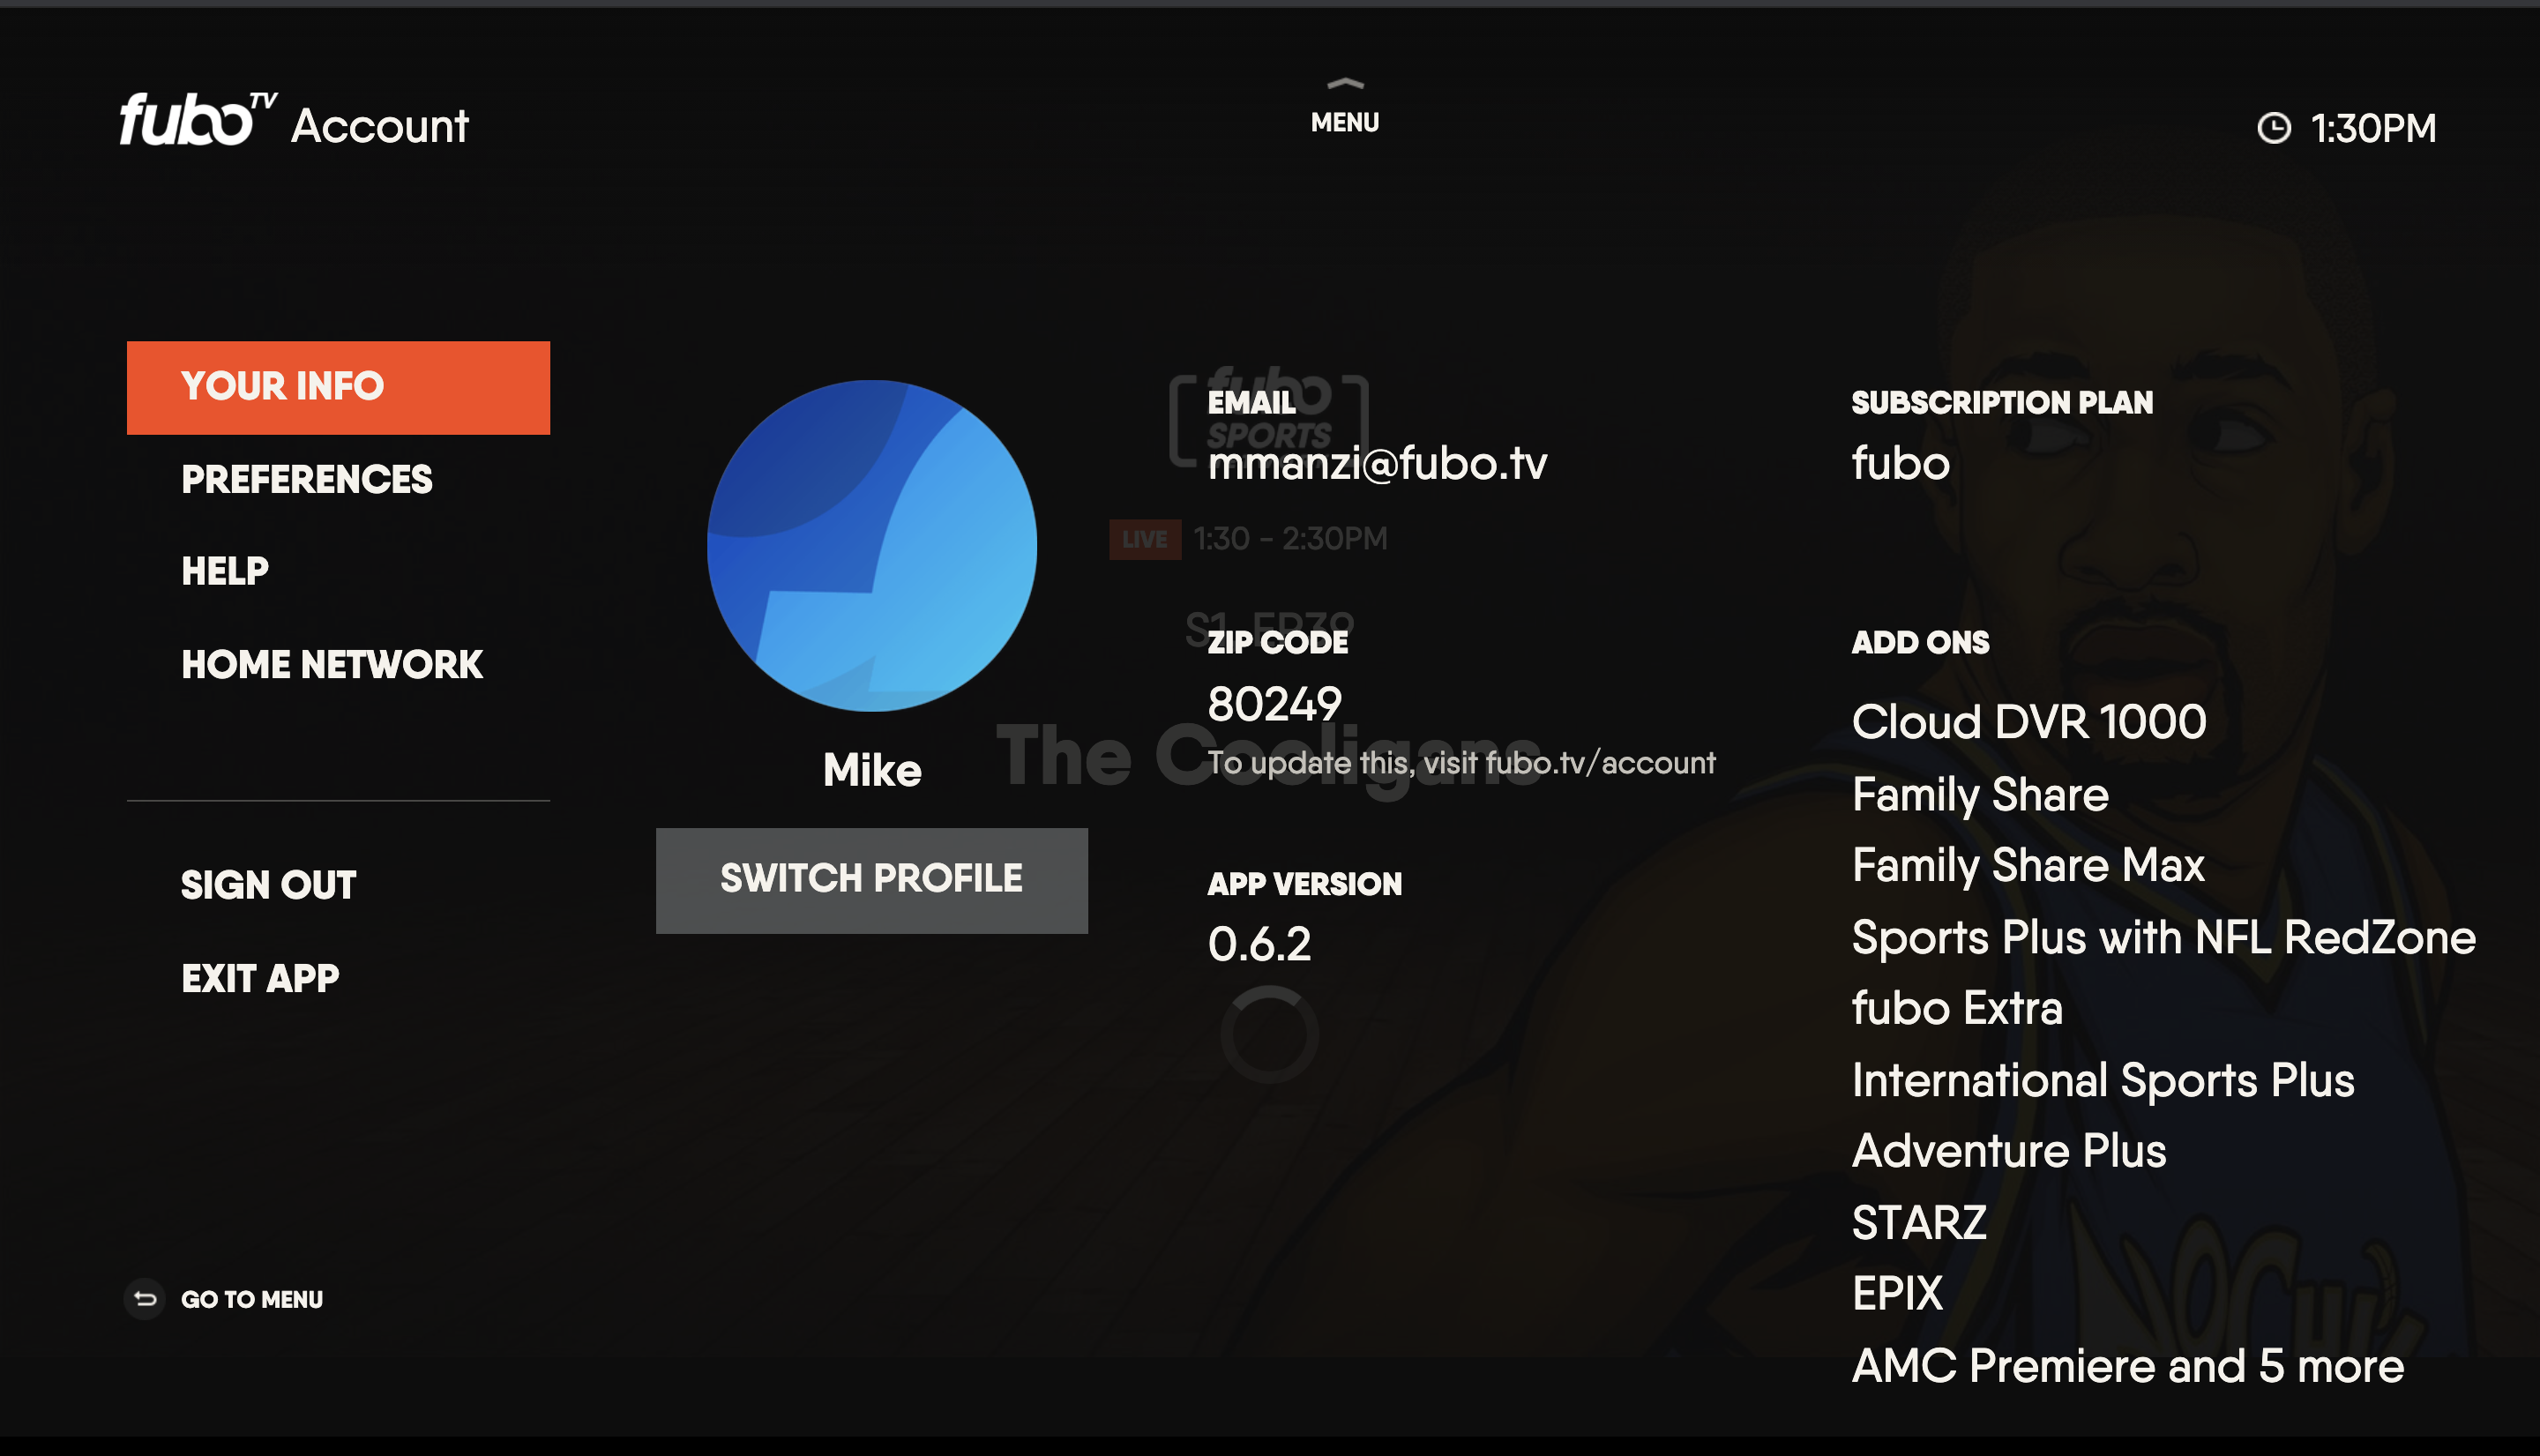 ACCOUNT screen of the FuboTV app on Vizio TV, accessible by selecting the profile icon in the top menu